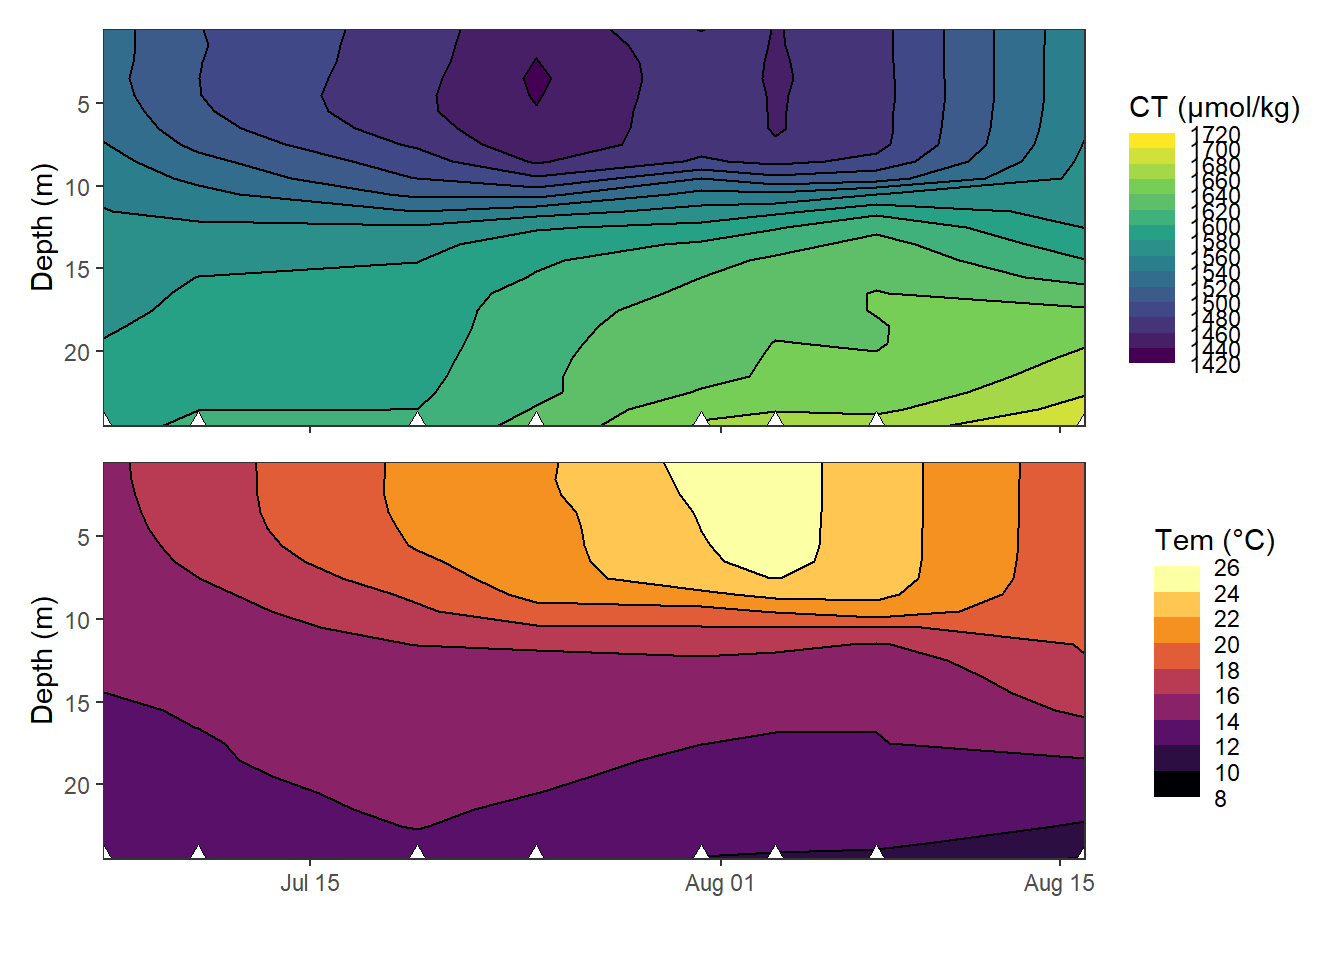 Hovmoeller plots of absolute changes in C~T~ and temperature.